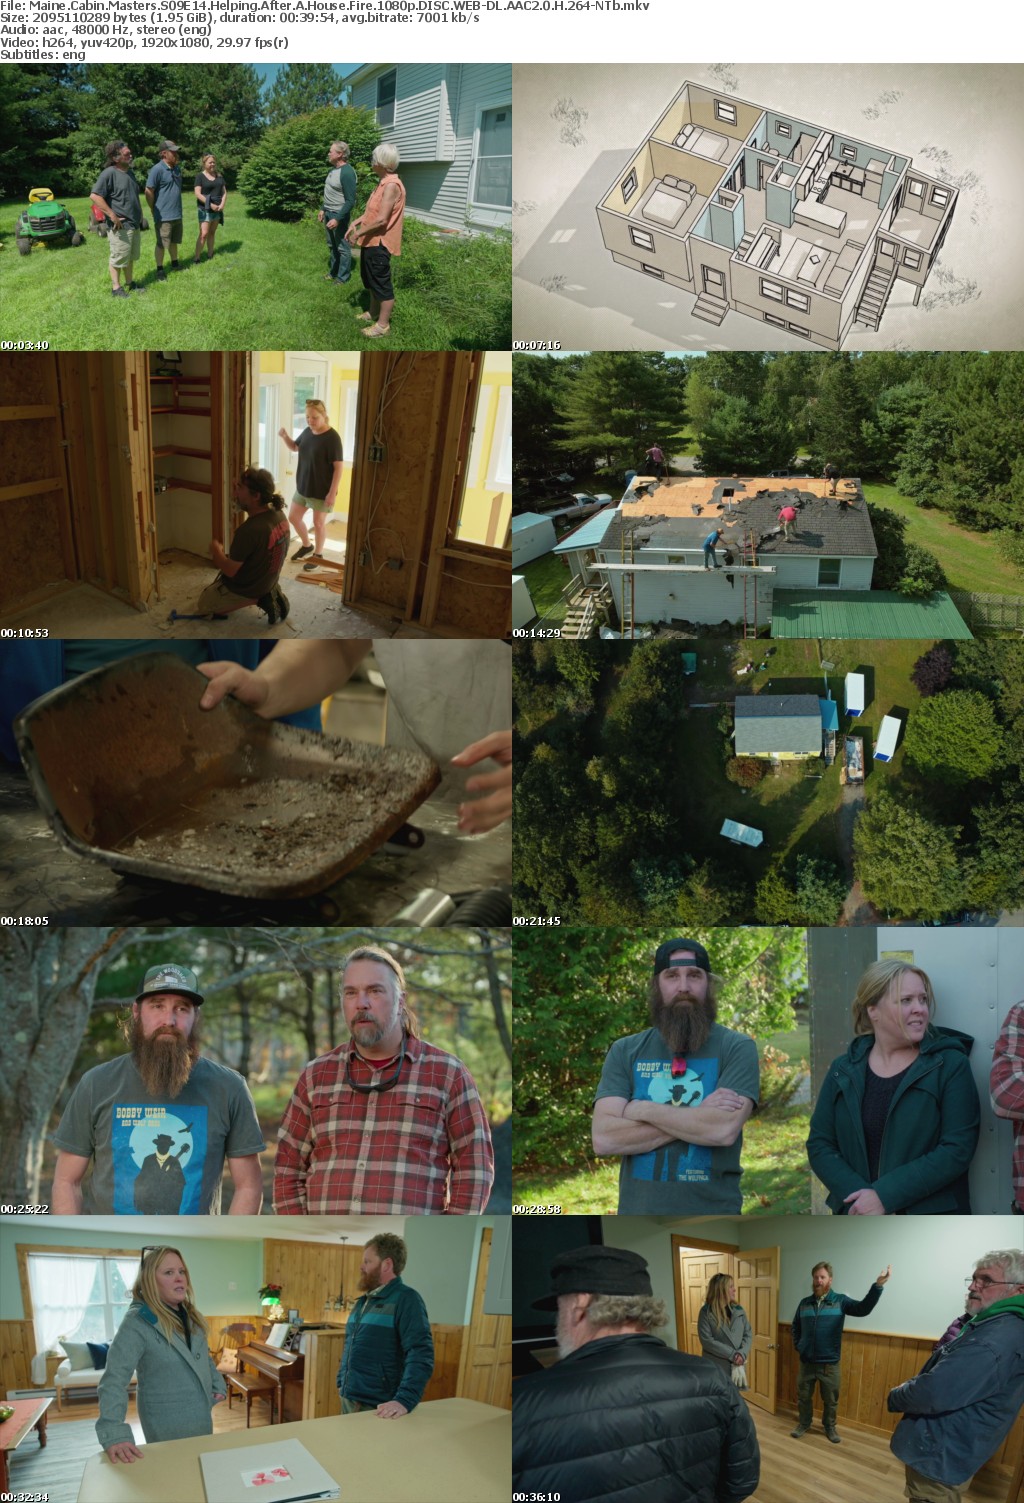 Maine Cabin Masters S09E14 Helping After A House Fire 1080p DISC WEB-DL AAC2 0 H 264-NTb